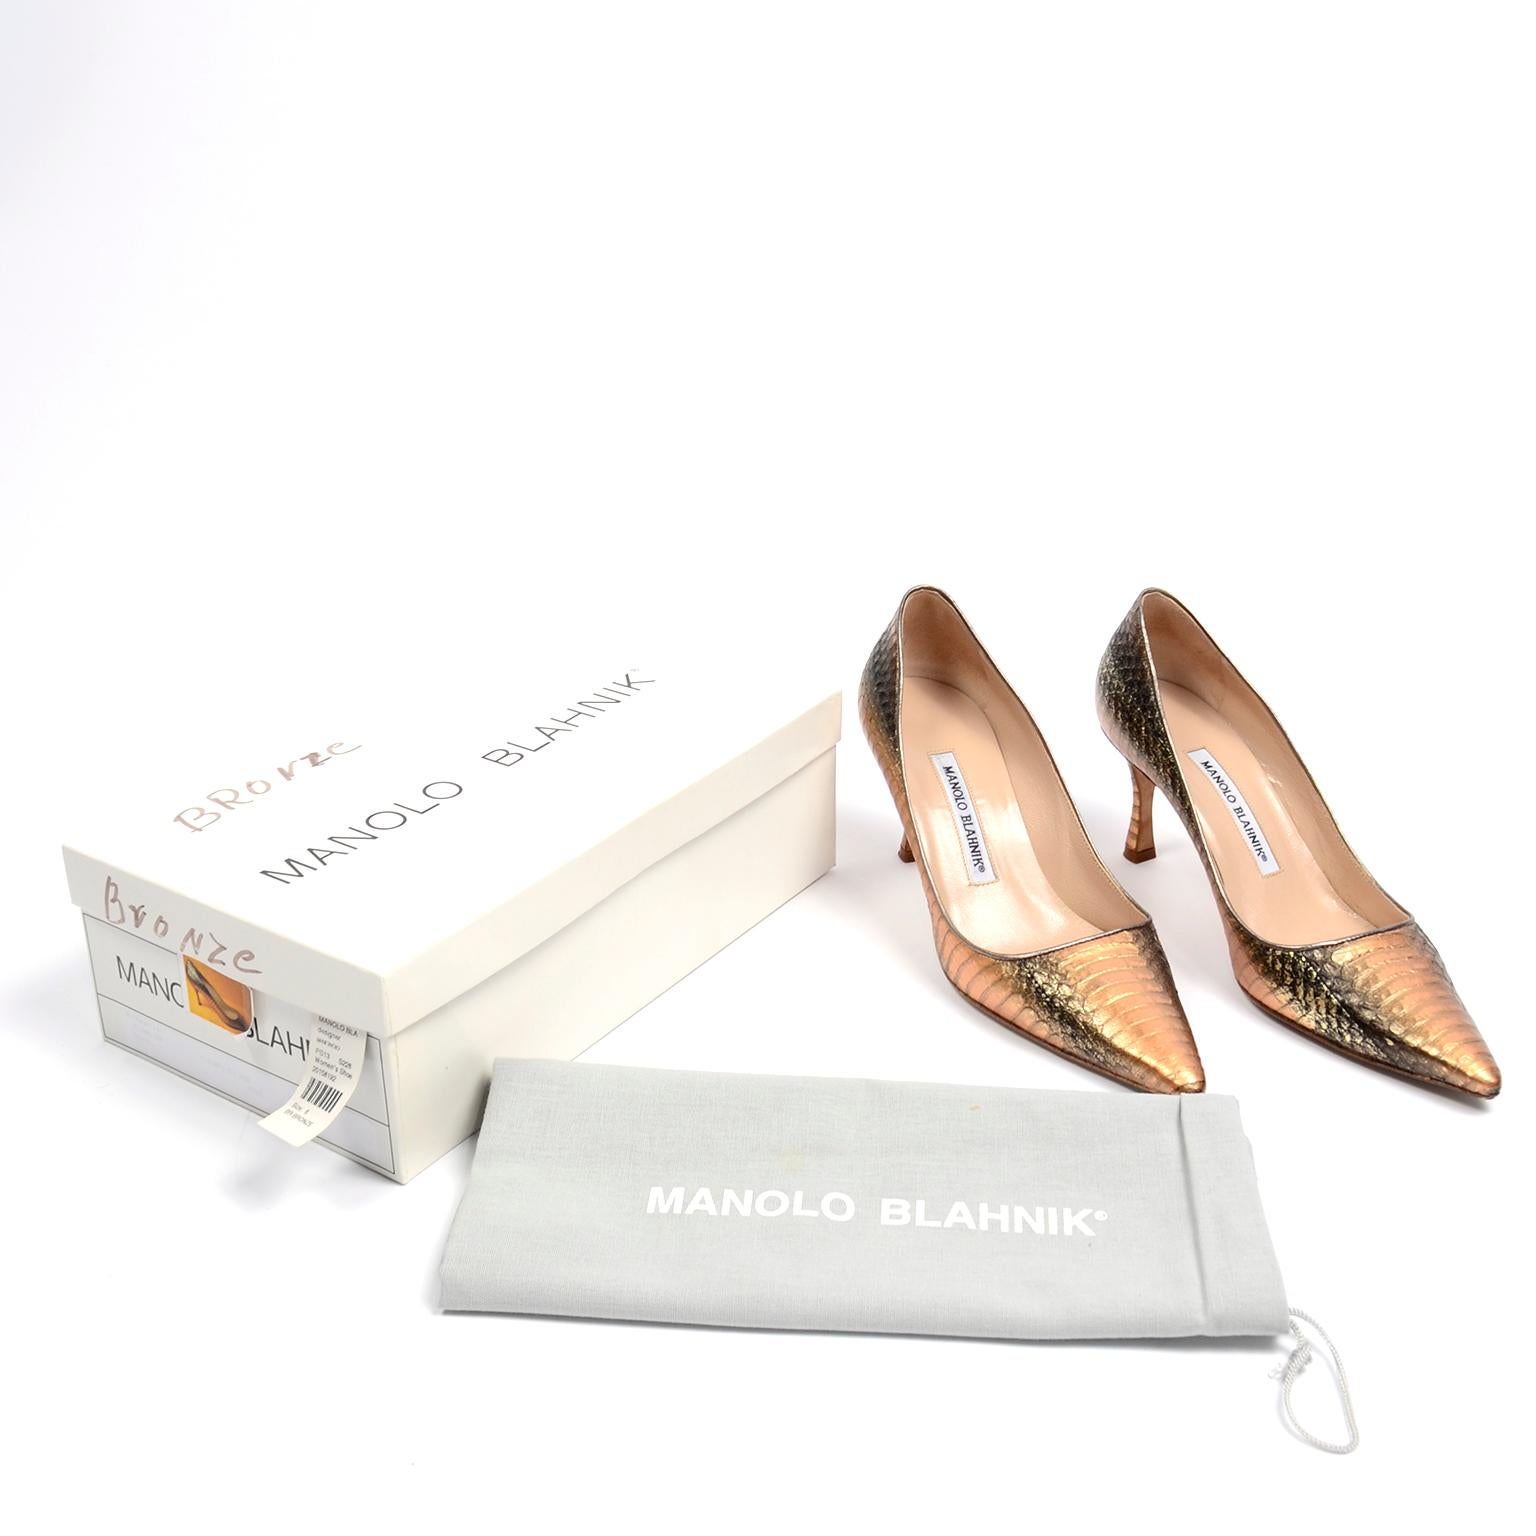 These are incredible Manolo Blahnik pumps in a copper / bronze snakeskin. The style name is Newcio and the color is Rose Bronze. These shoes were originally purchased at the high end boutique Mario's in Portland, Oregon, and they come with their